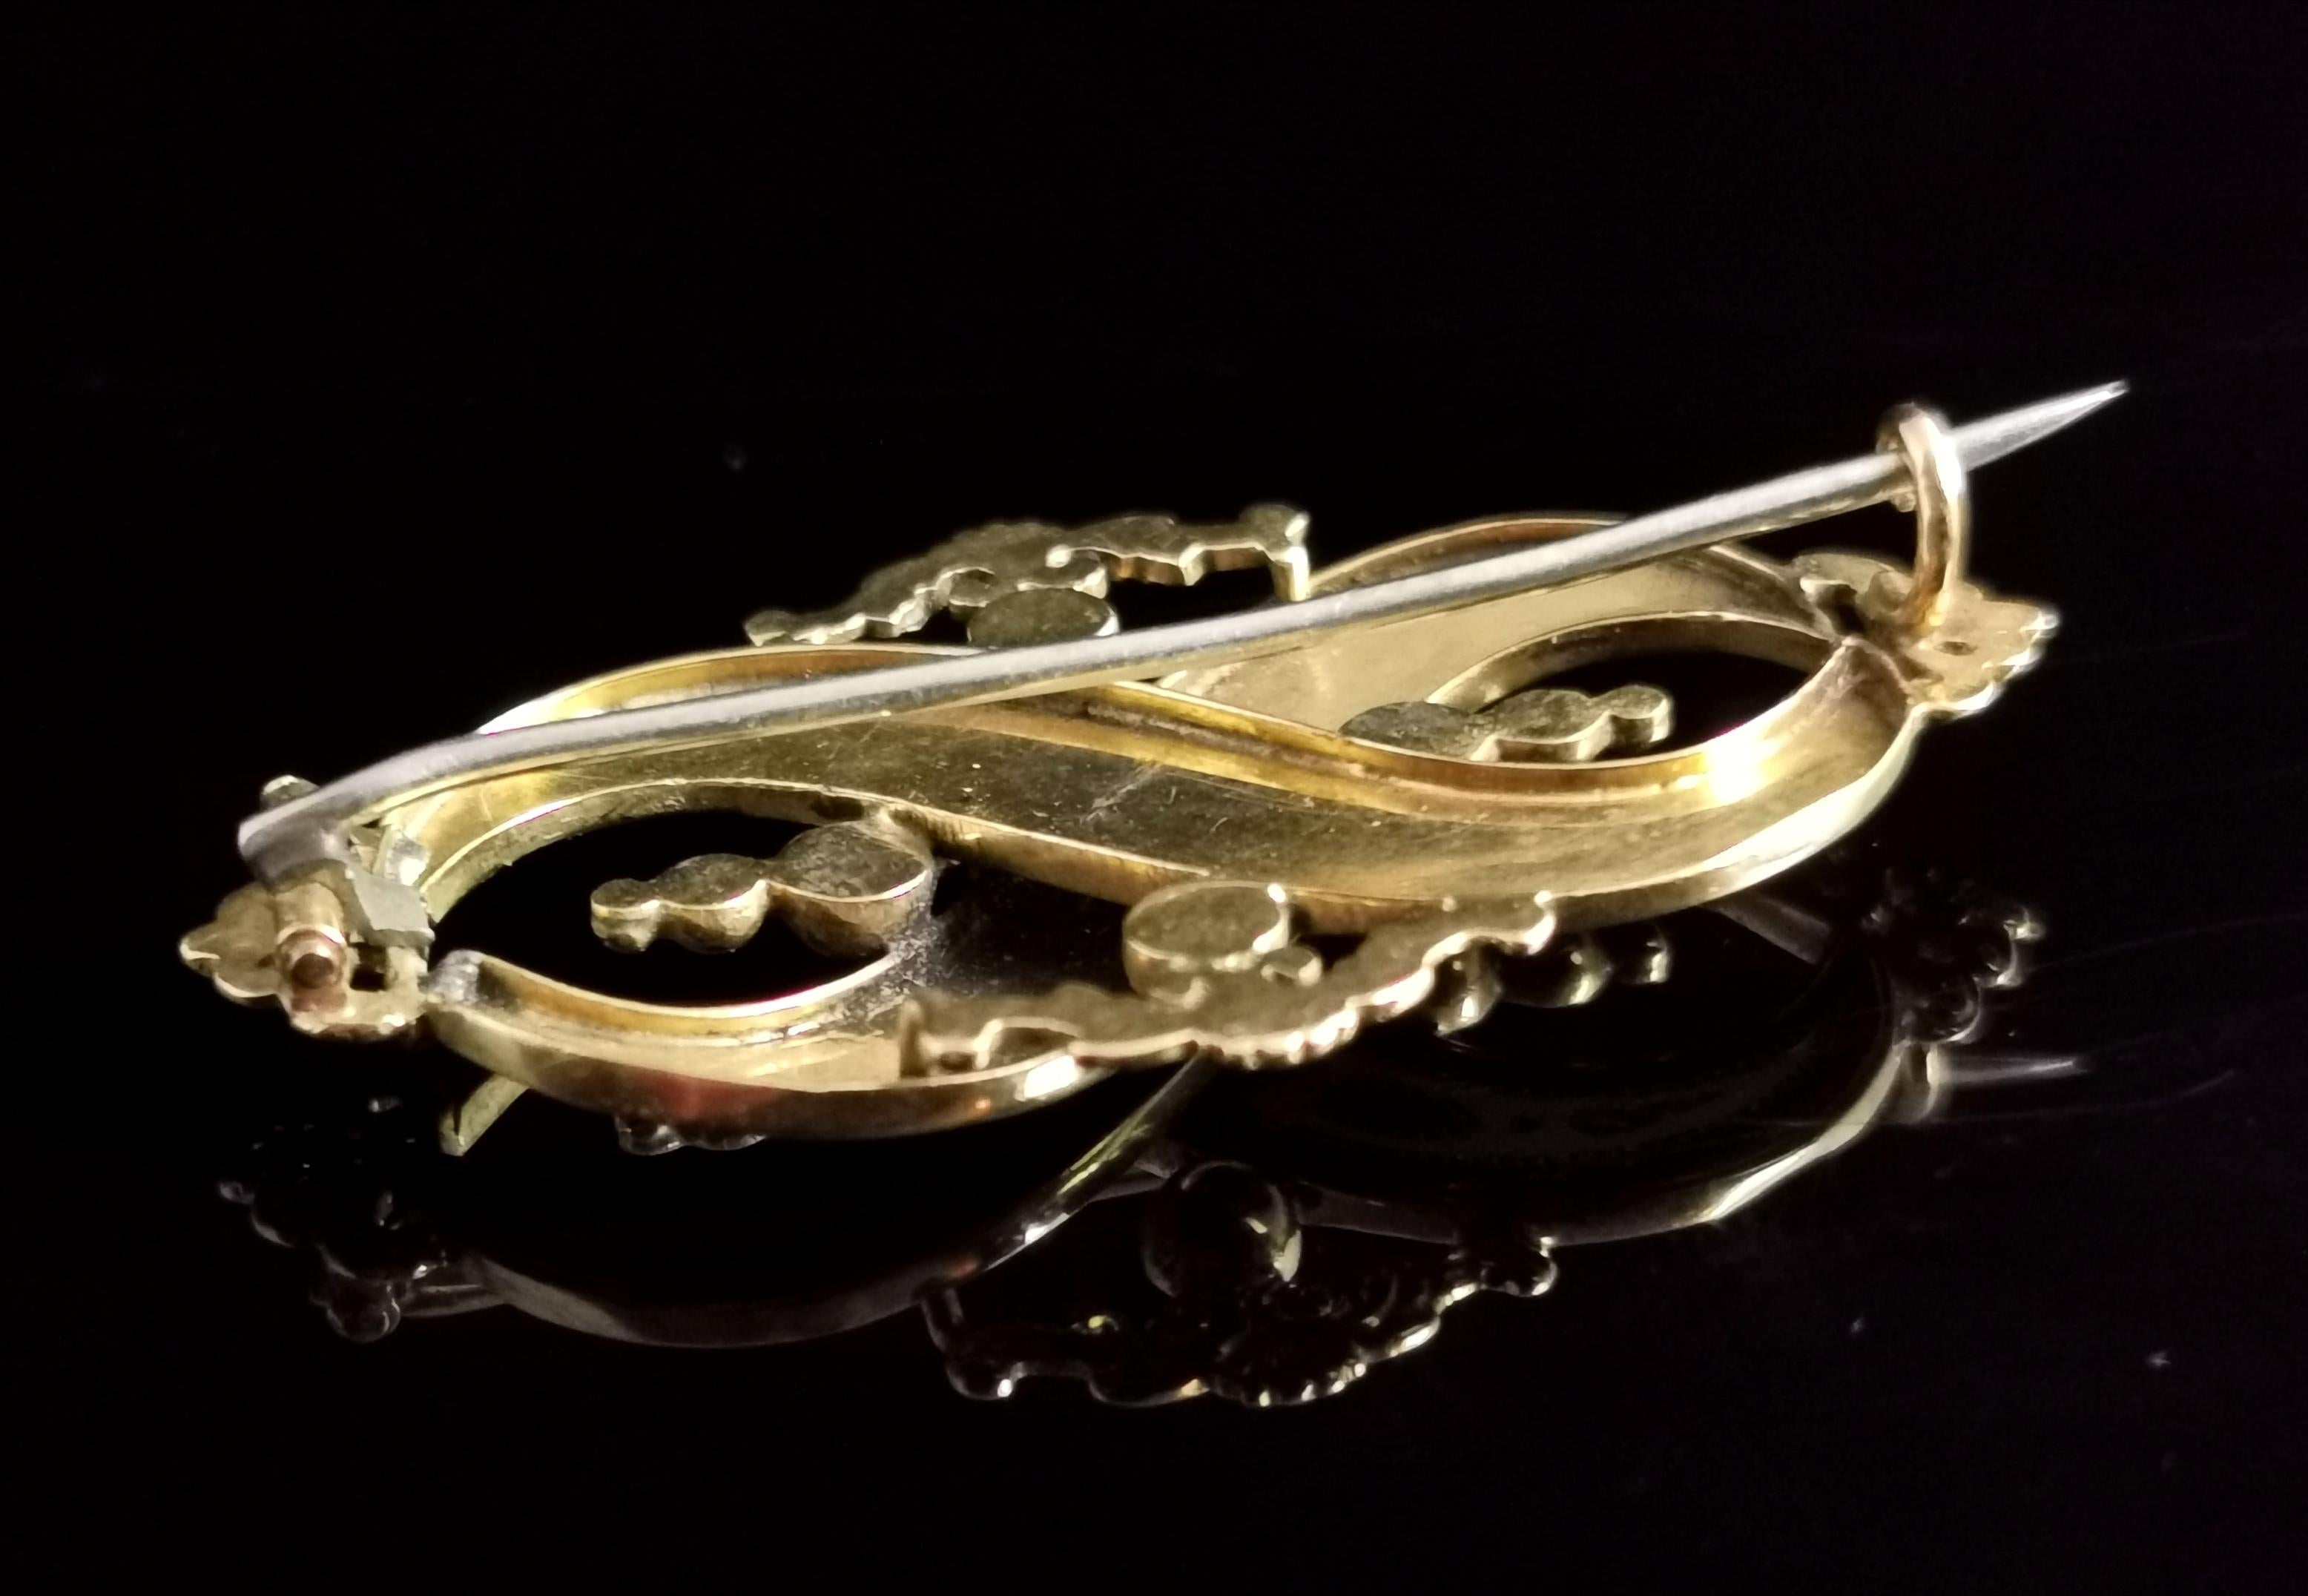 Antique Victorian Mourning Brooch, 15 Karat Yellow Gold, Black and White Enamel 3